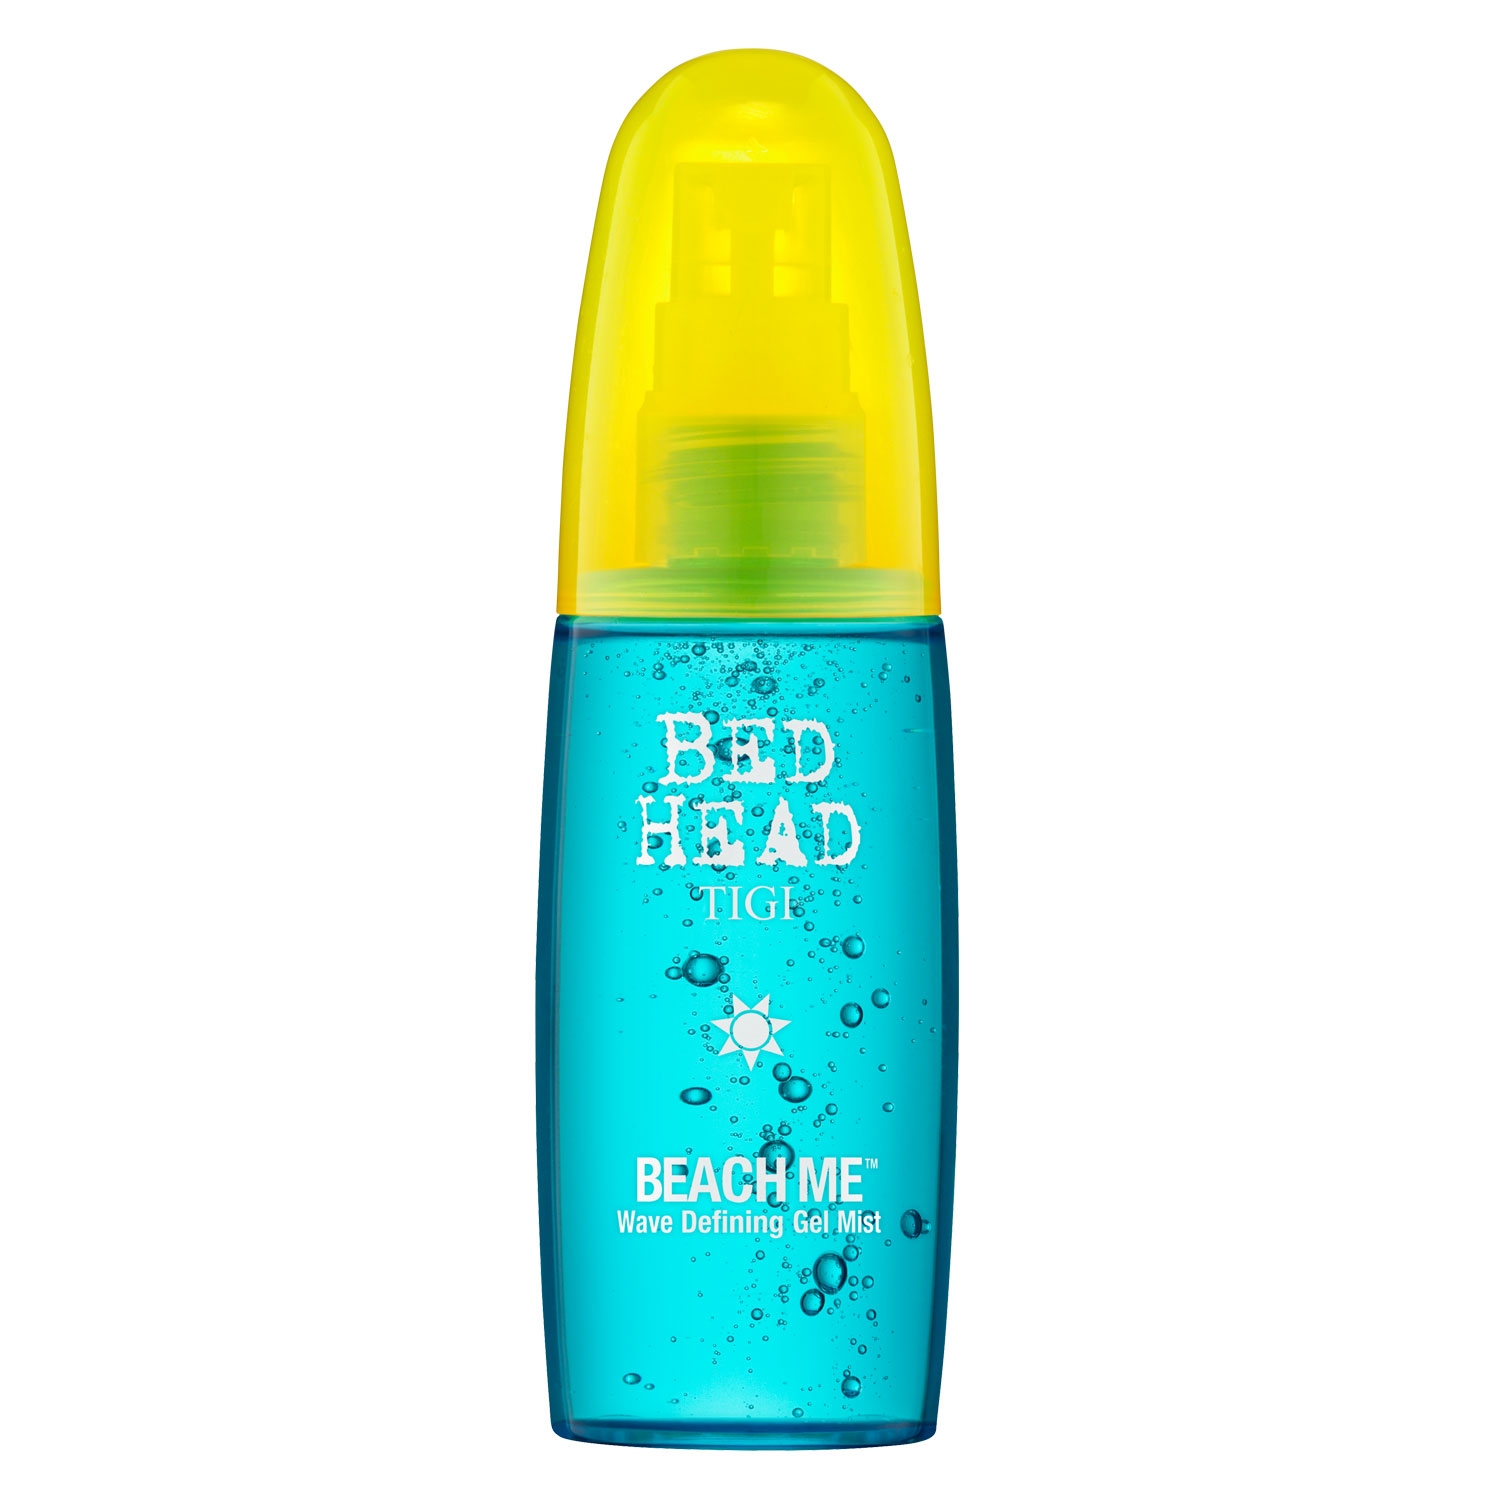 Product image from Bed Head - Beach Me